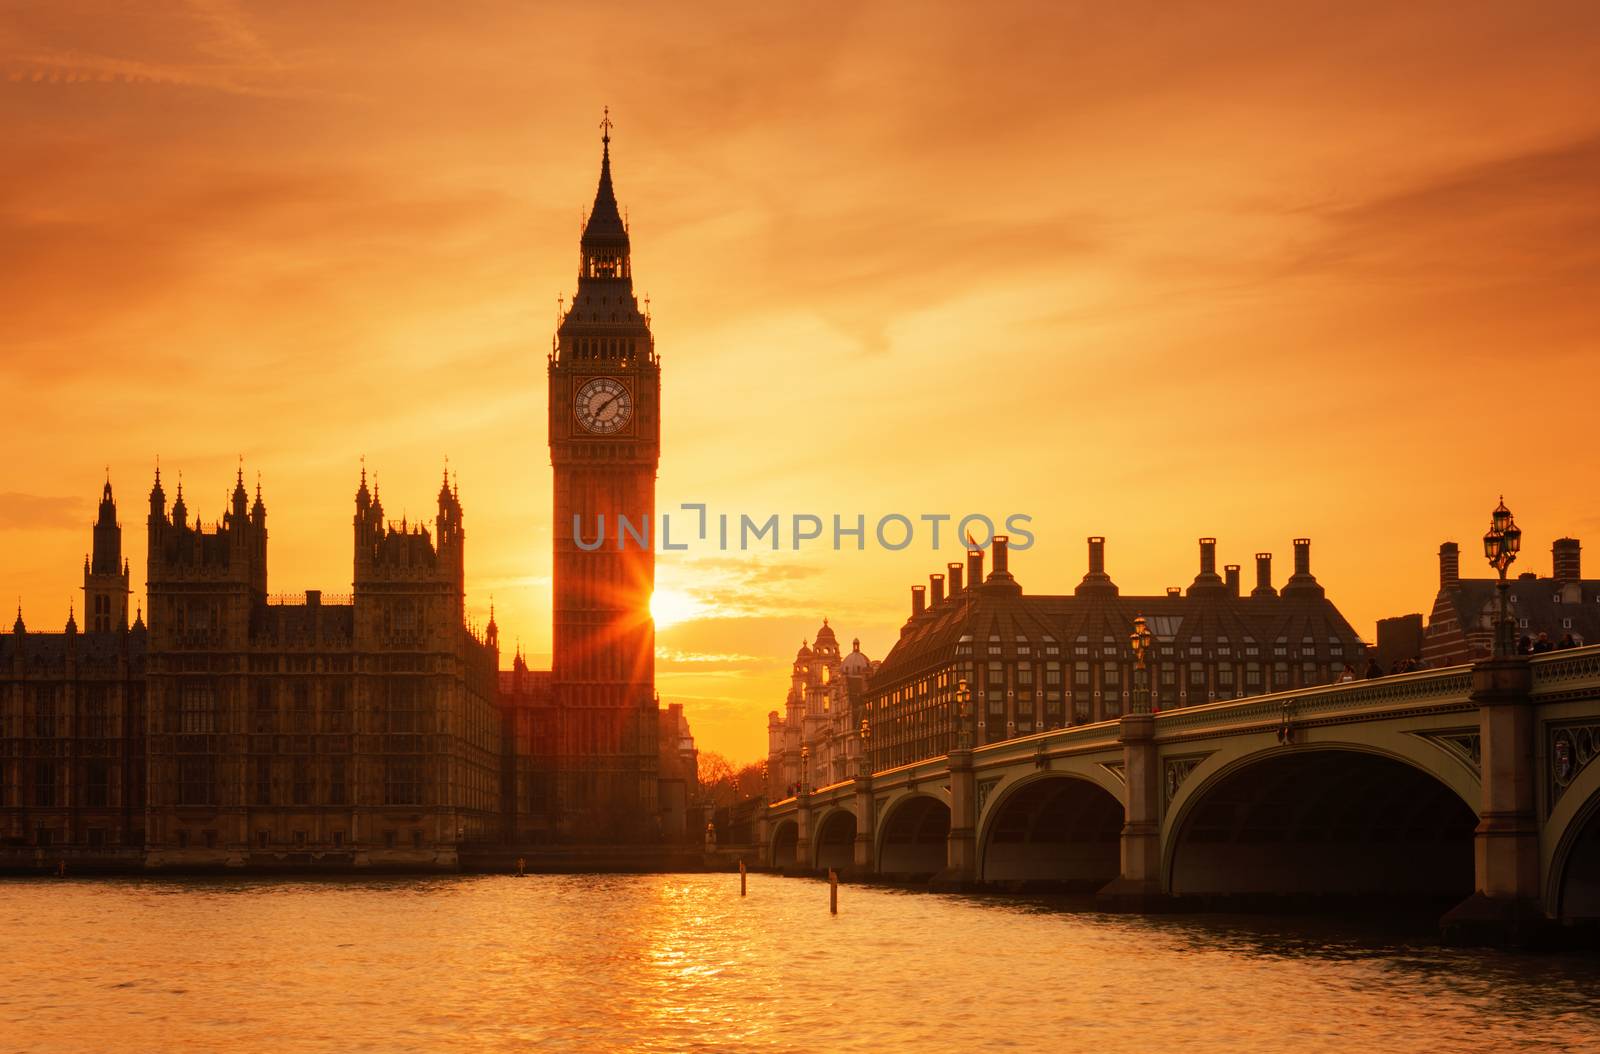 Famous Big Ben clock tower in London at sunset by vwalakte